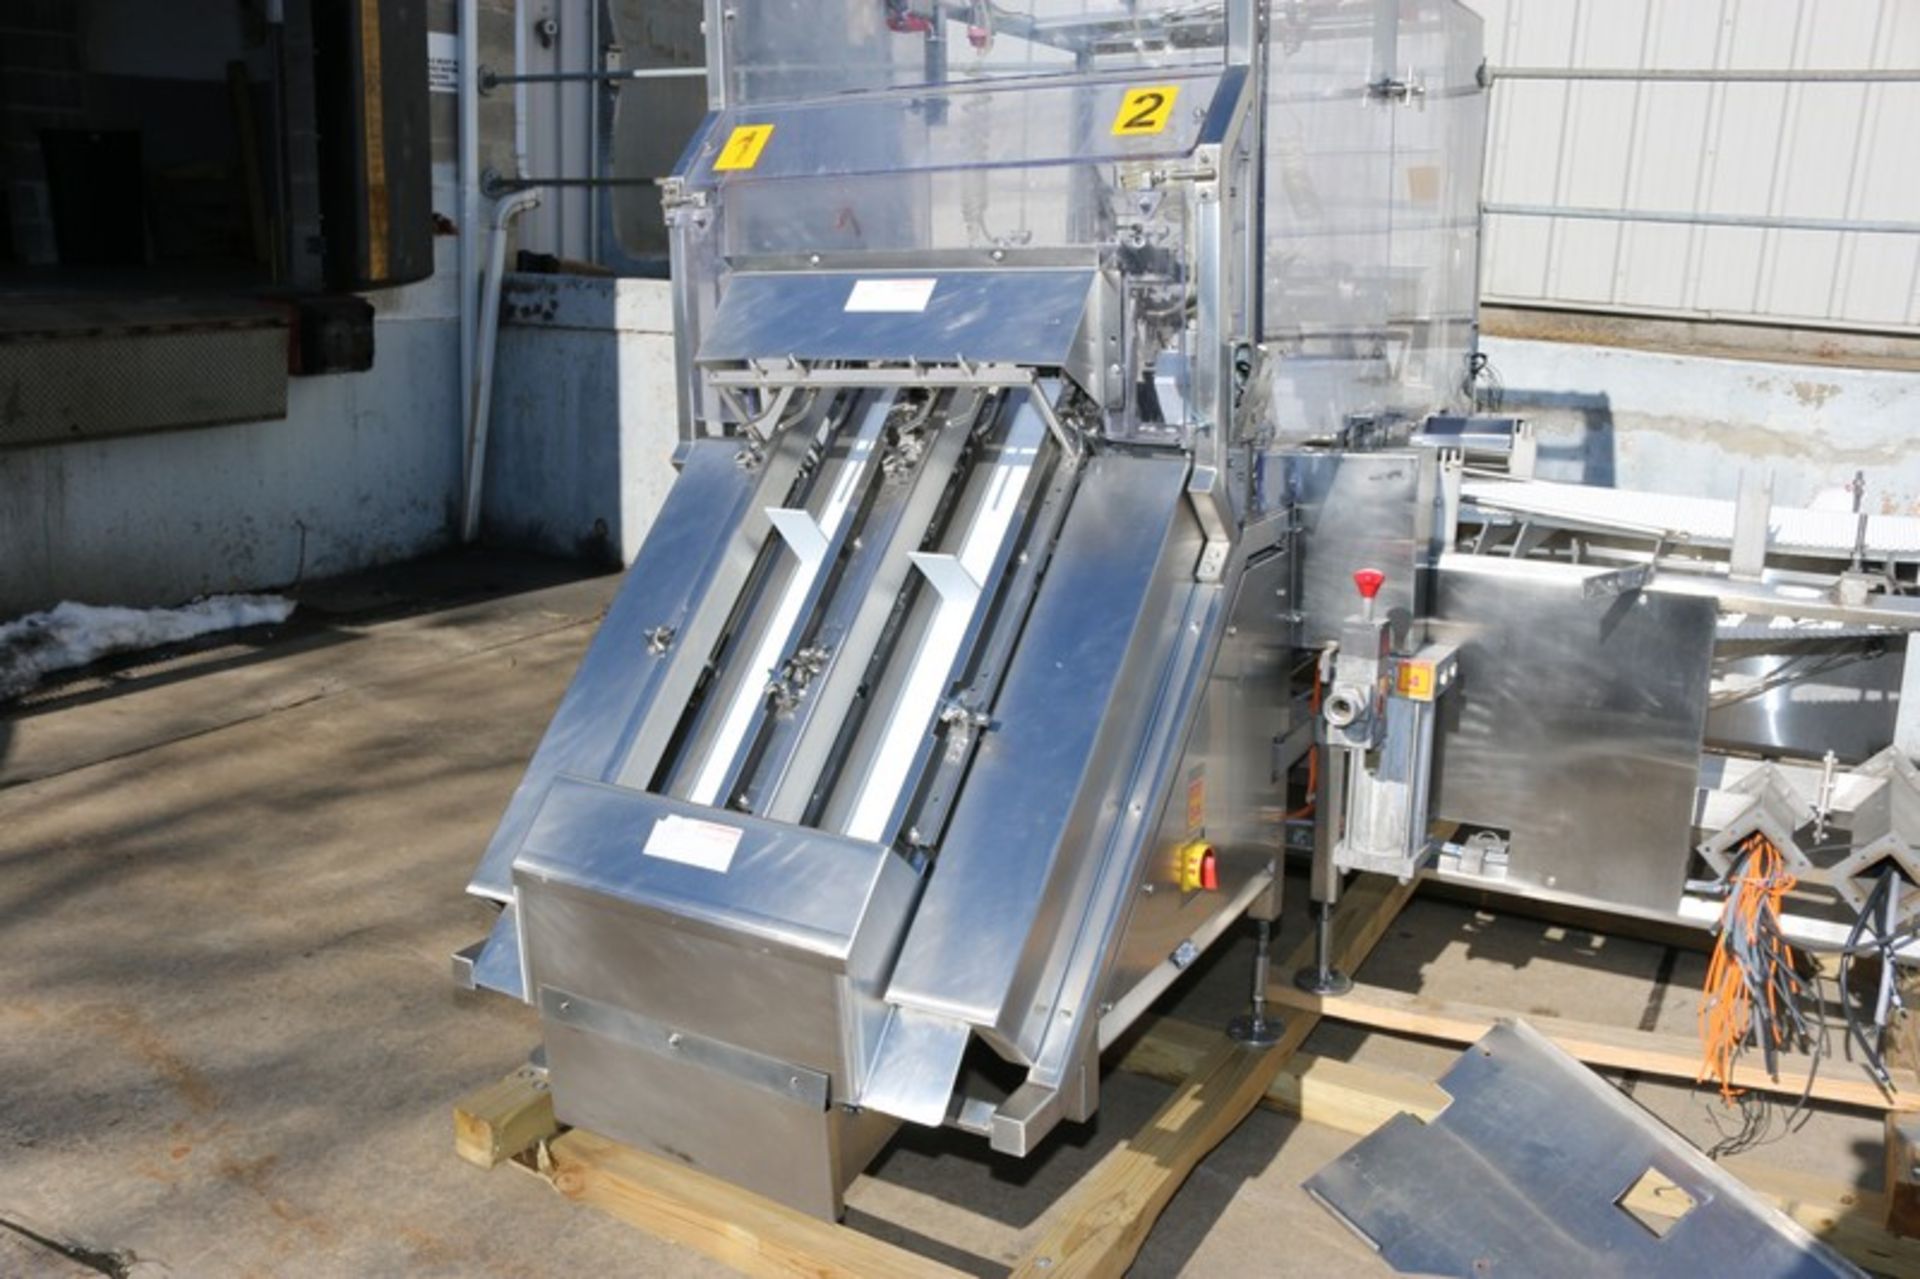 Raque S/S Tray Dispenser, 2-Lanes of Aprox. 8" W Outfeed Conveyor, with 4-Head Pick N' Place - Image 3 of 11